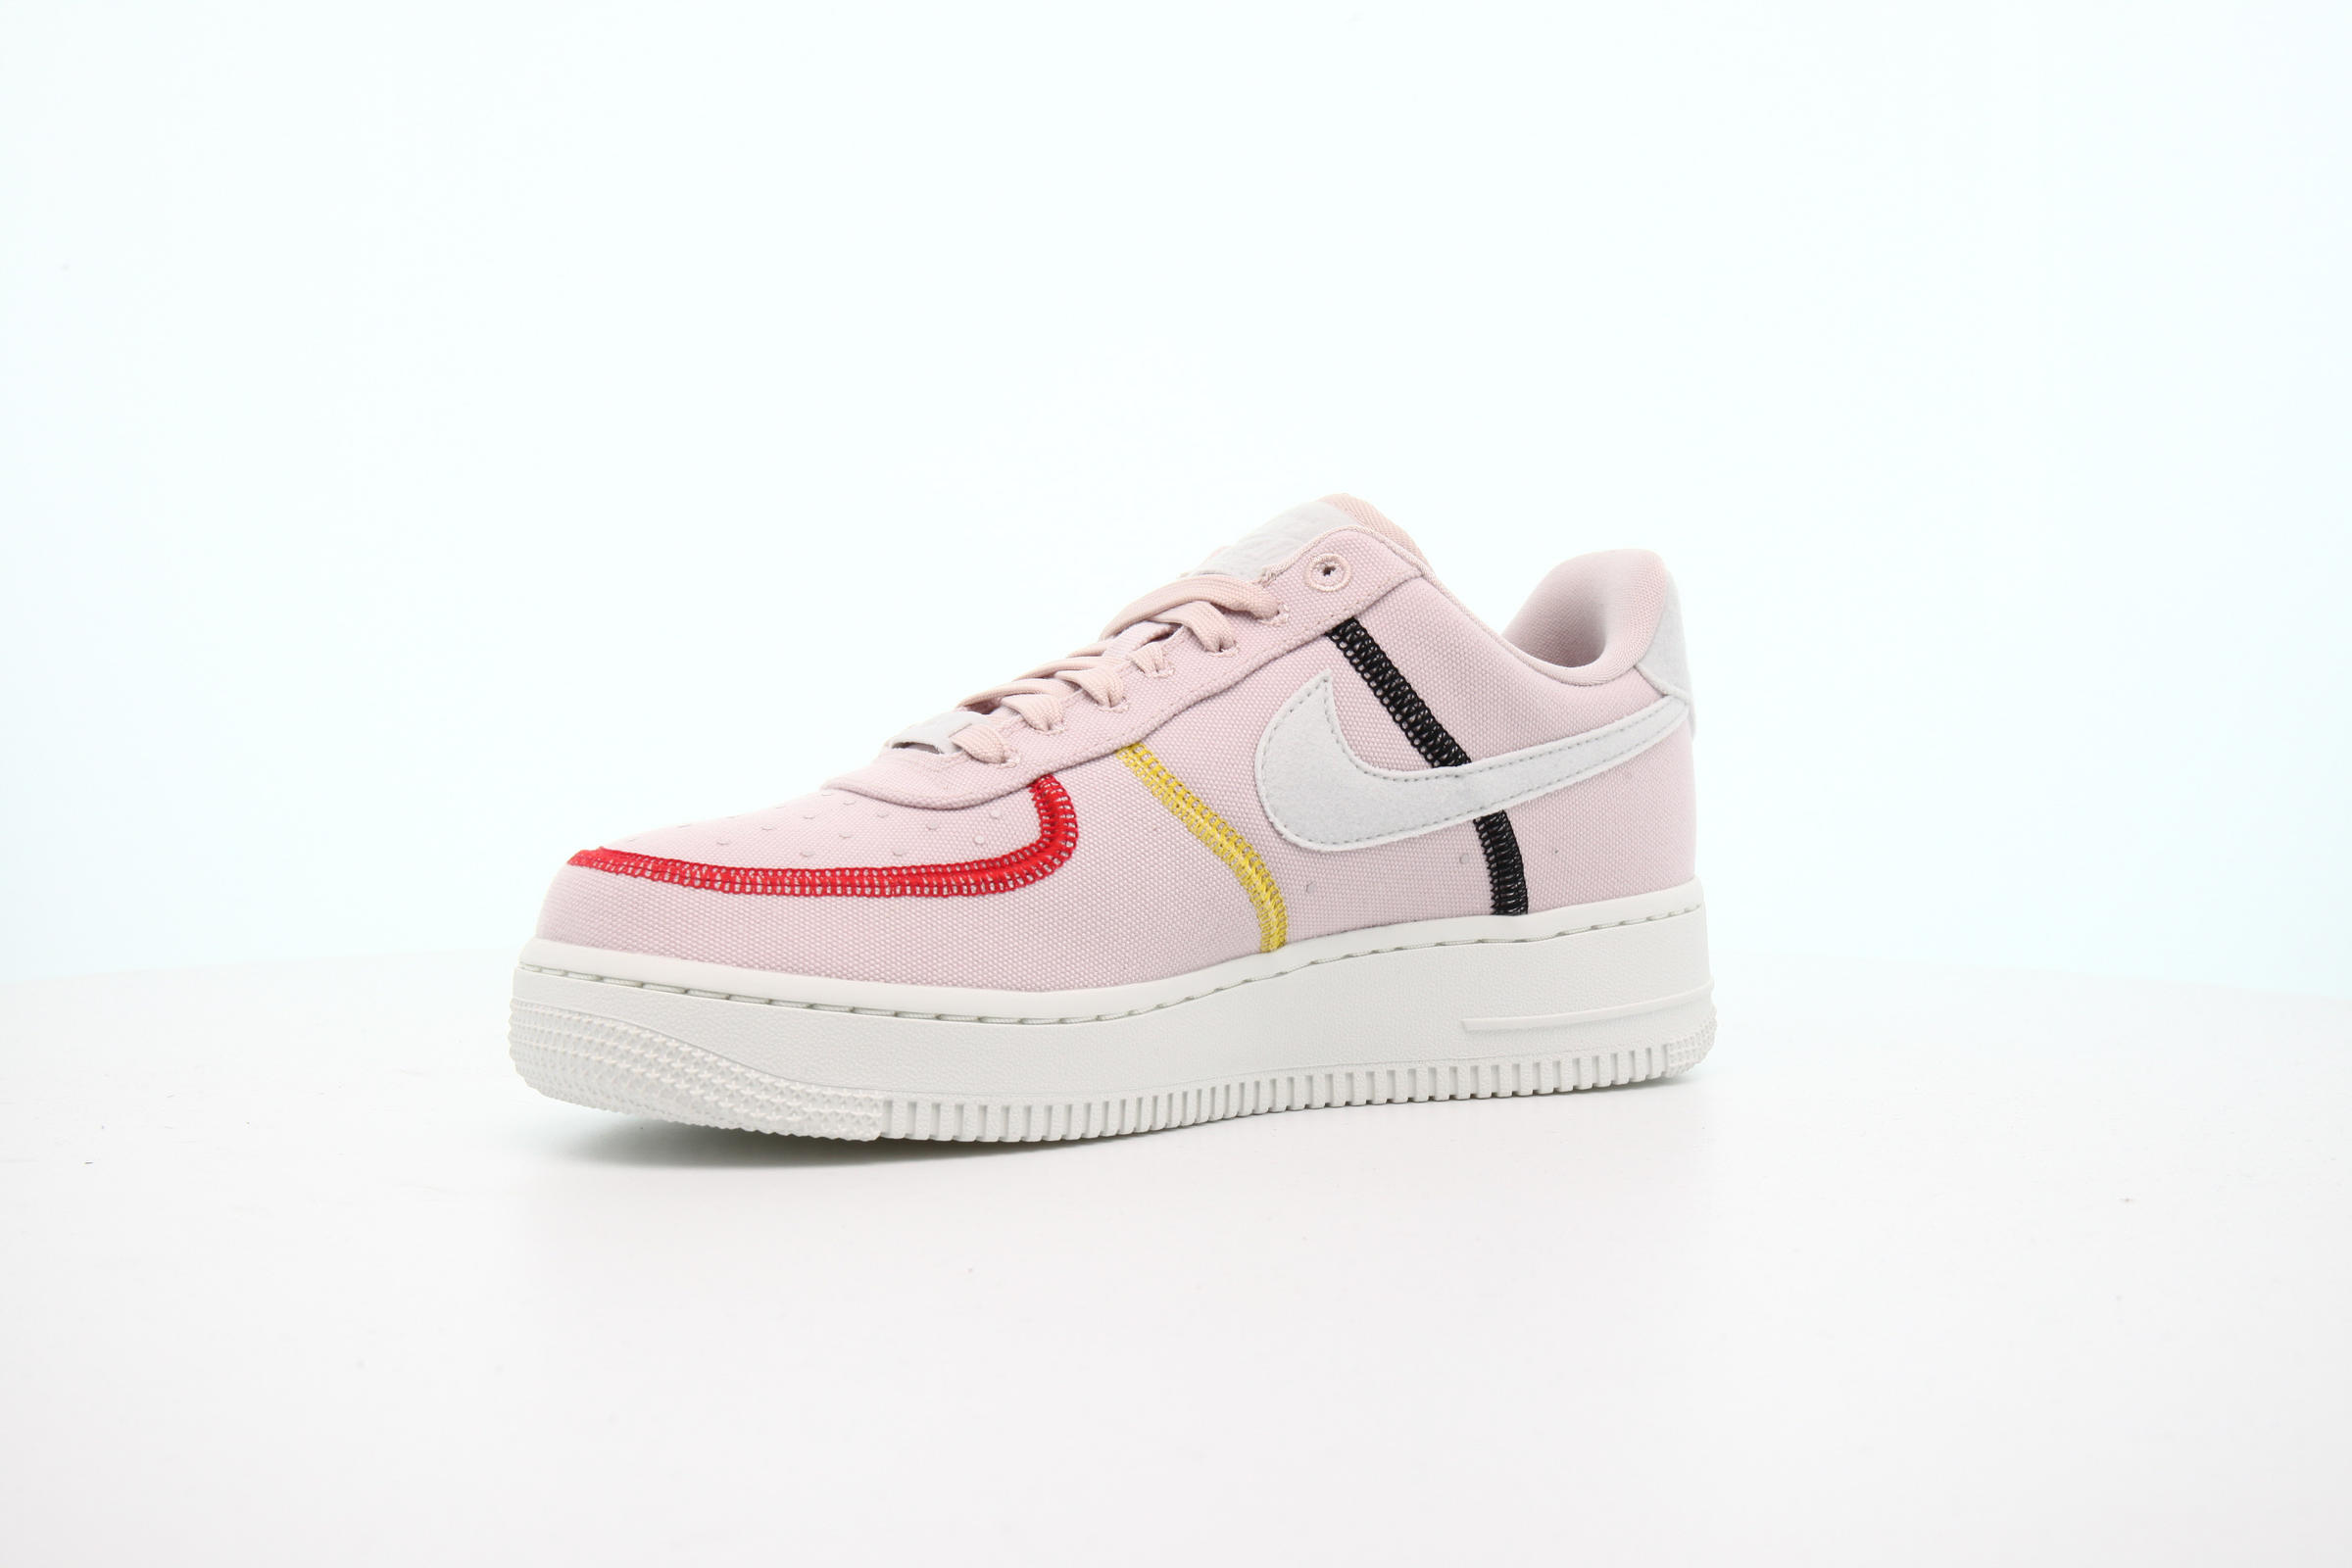 Nike WMNS AIR FORCE 1 '07 LX "SILT RED"